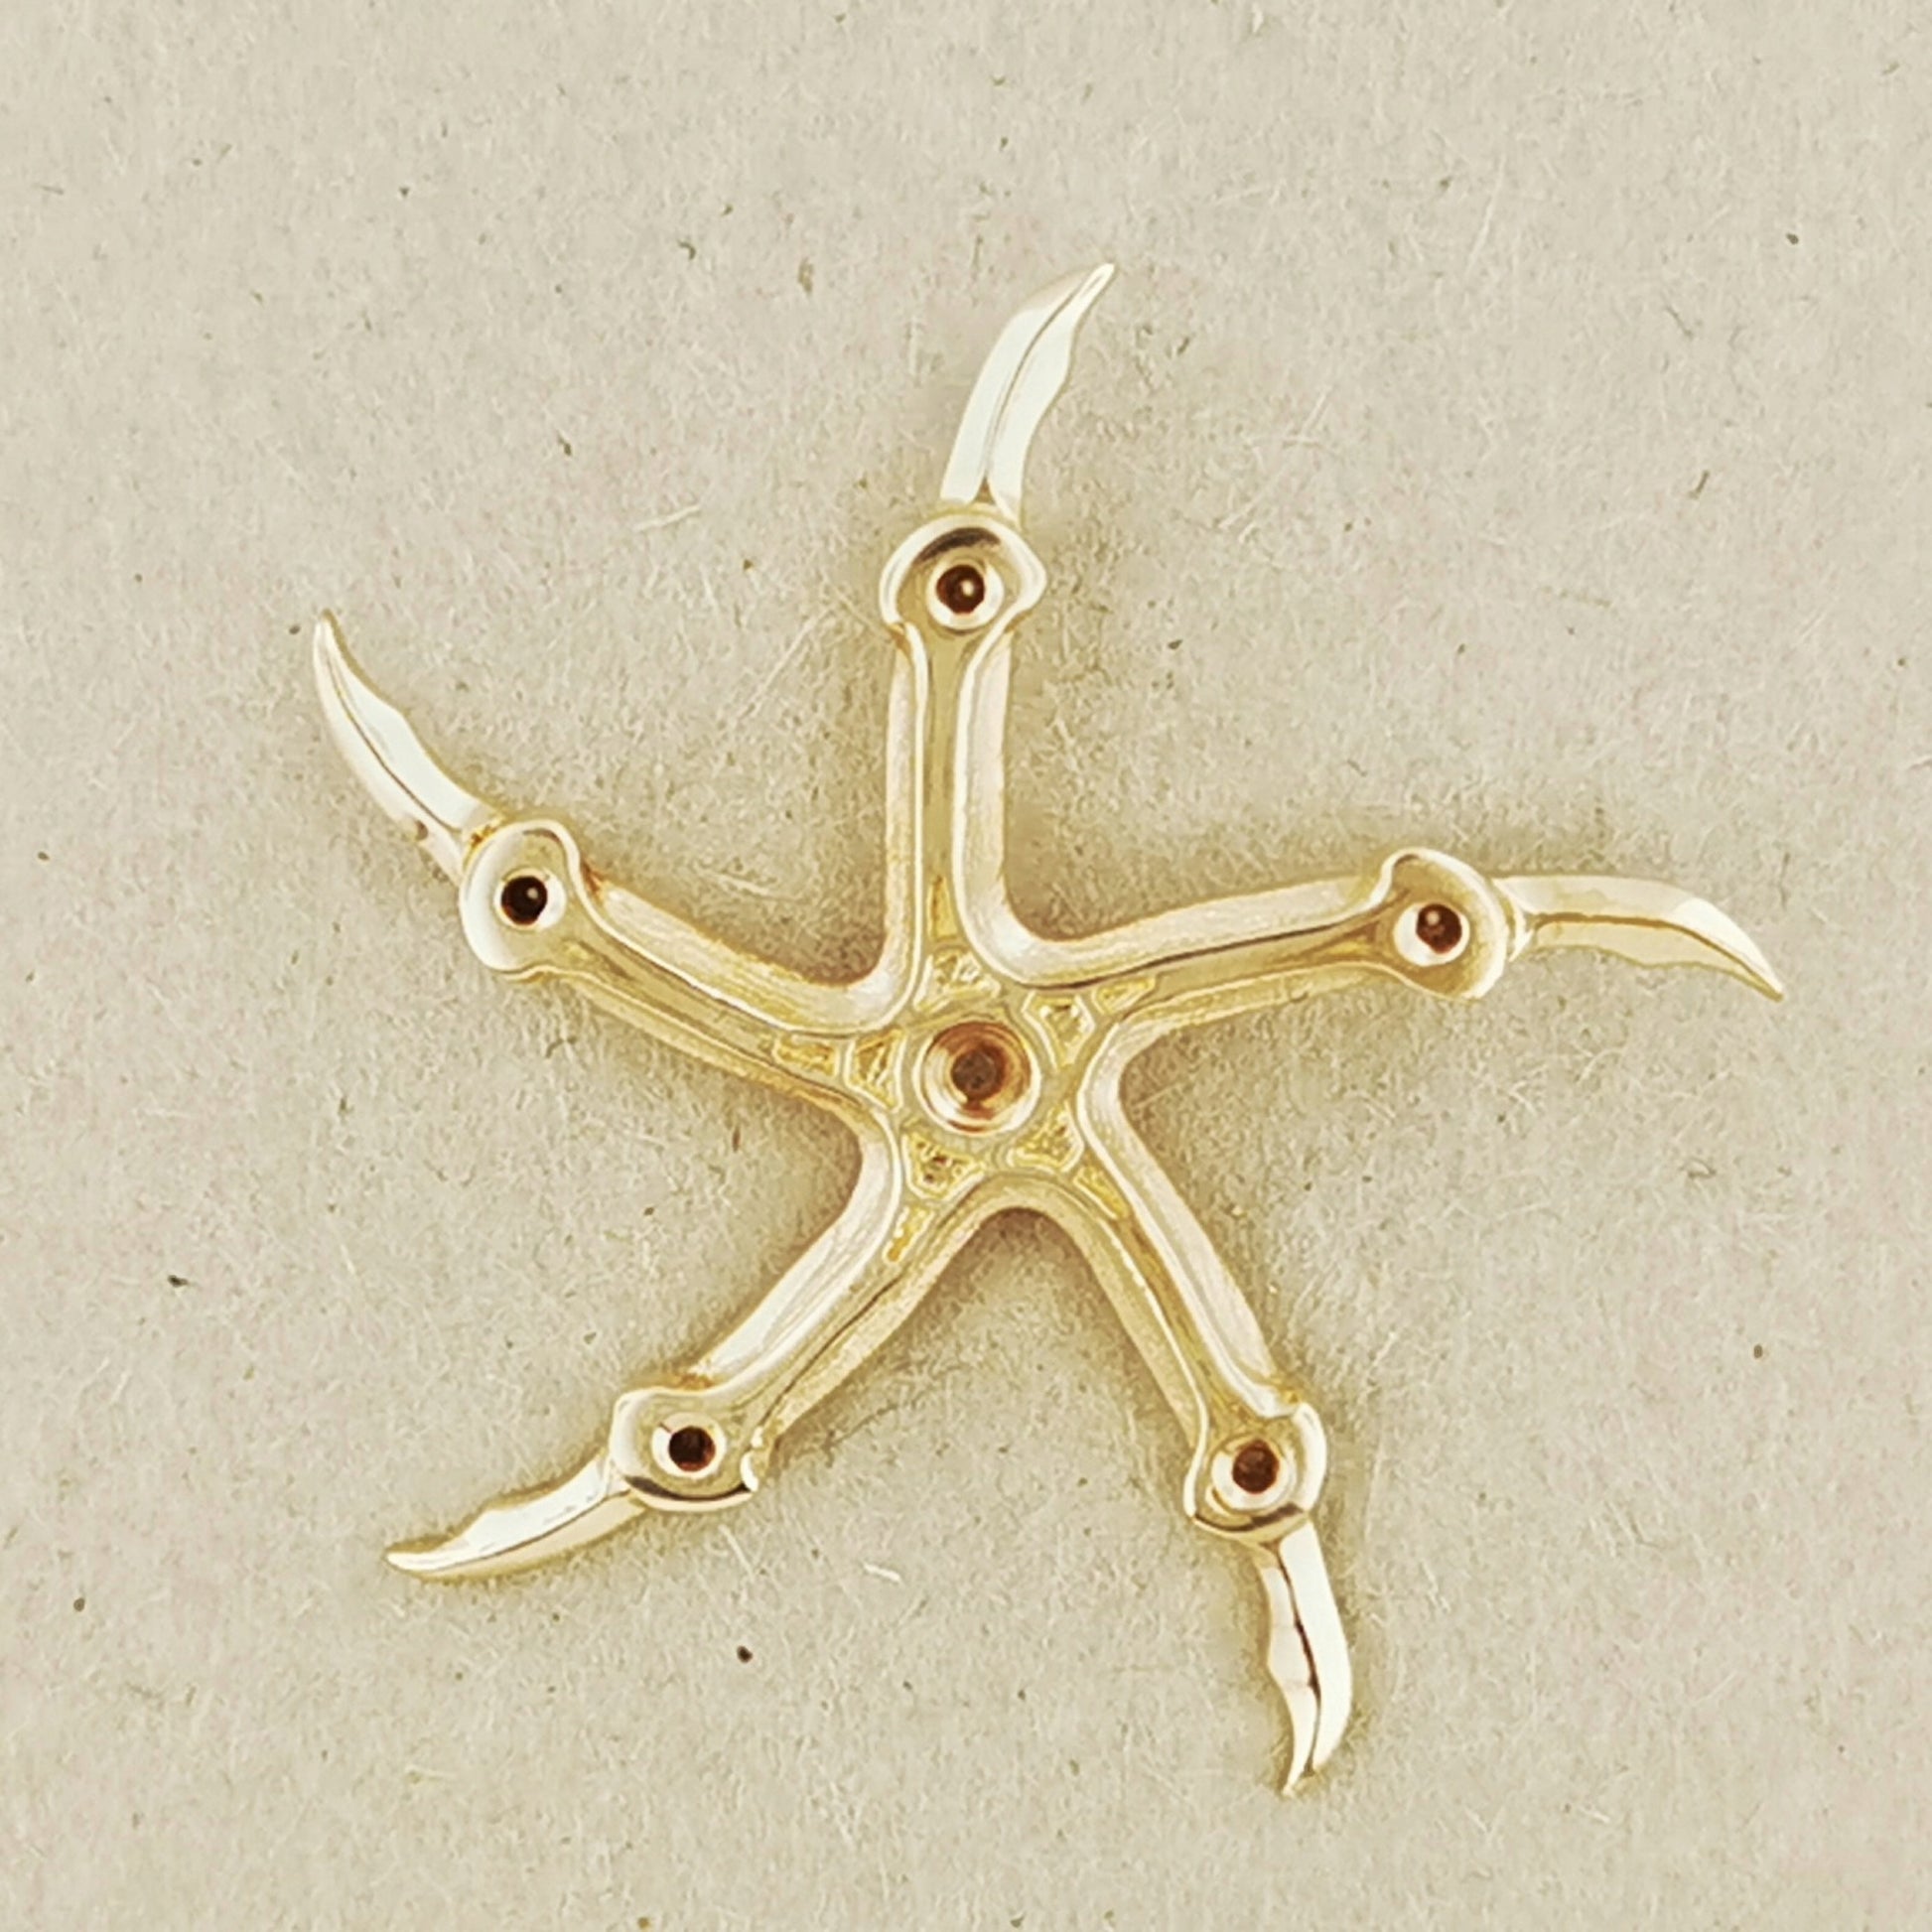 Krull Glaive Pendant in 925 Silver or Antique Bronze, Throwing Star Pendant Necklace, 80s Sci-Fi Pendant, Pop Culture Movie Pendant, Geeky Gift For Him, Bronze Krull Pendant, Pop Culture Geek Pendant, Bronze Movie Pendant, Bronze Krull pendant